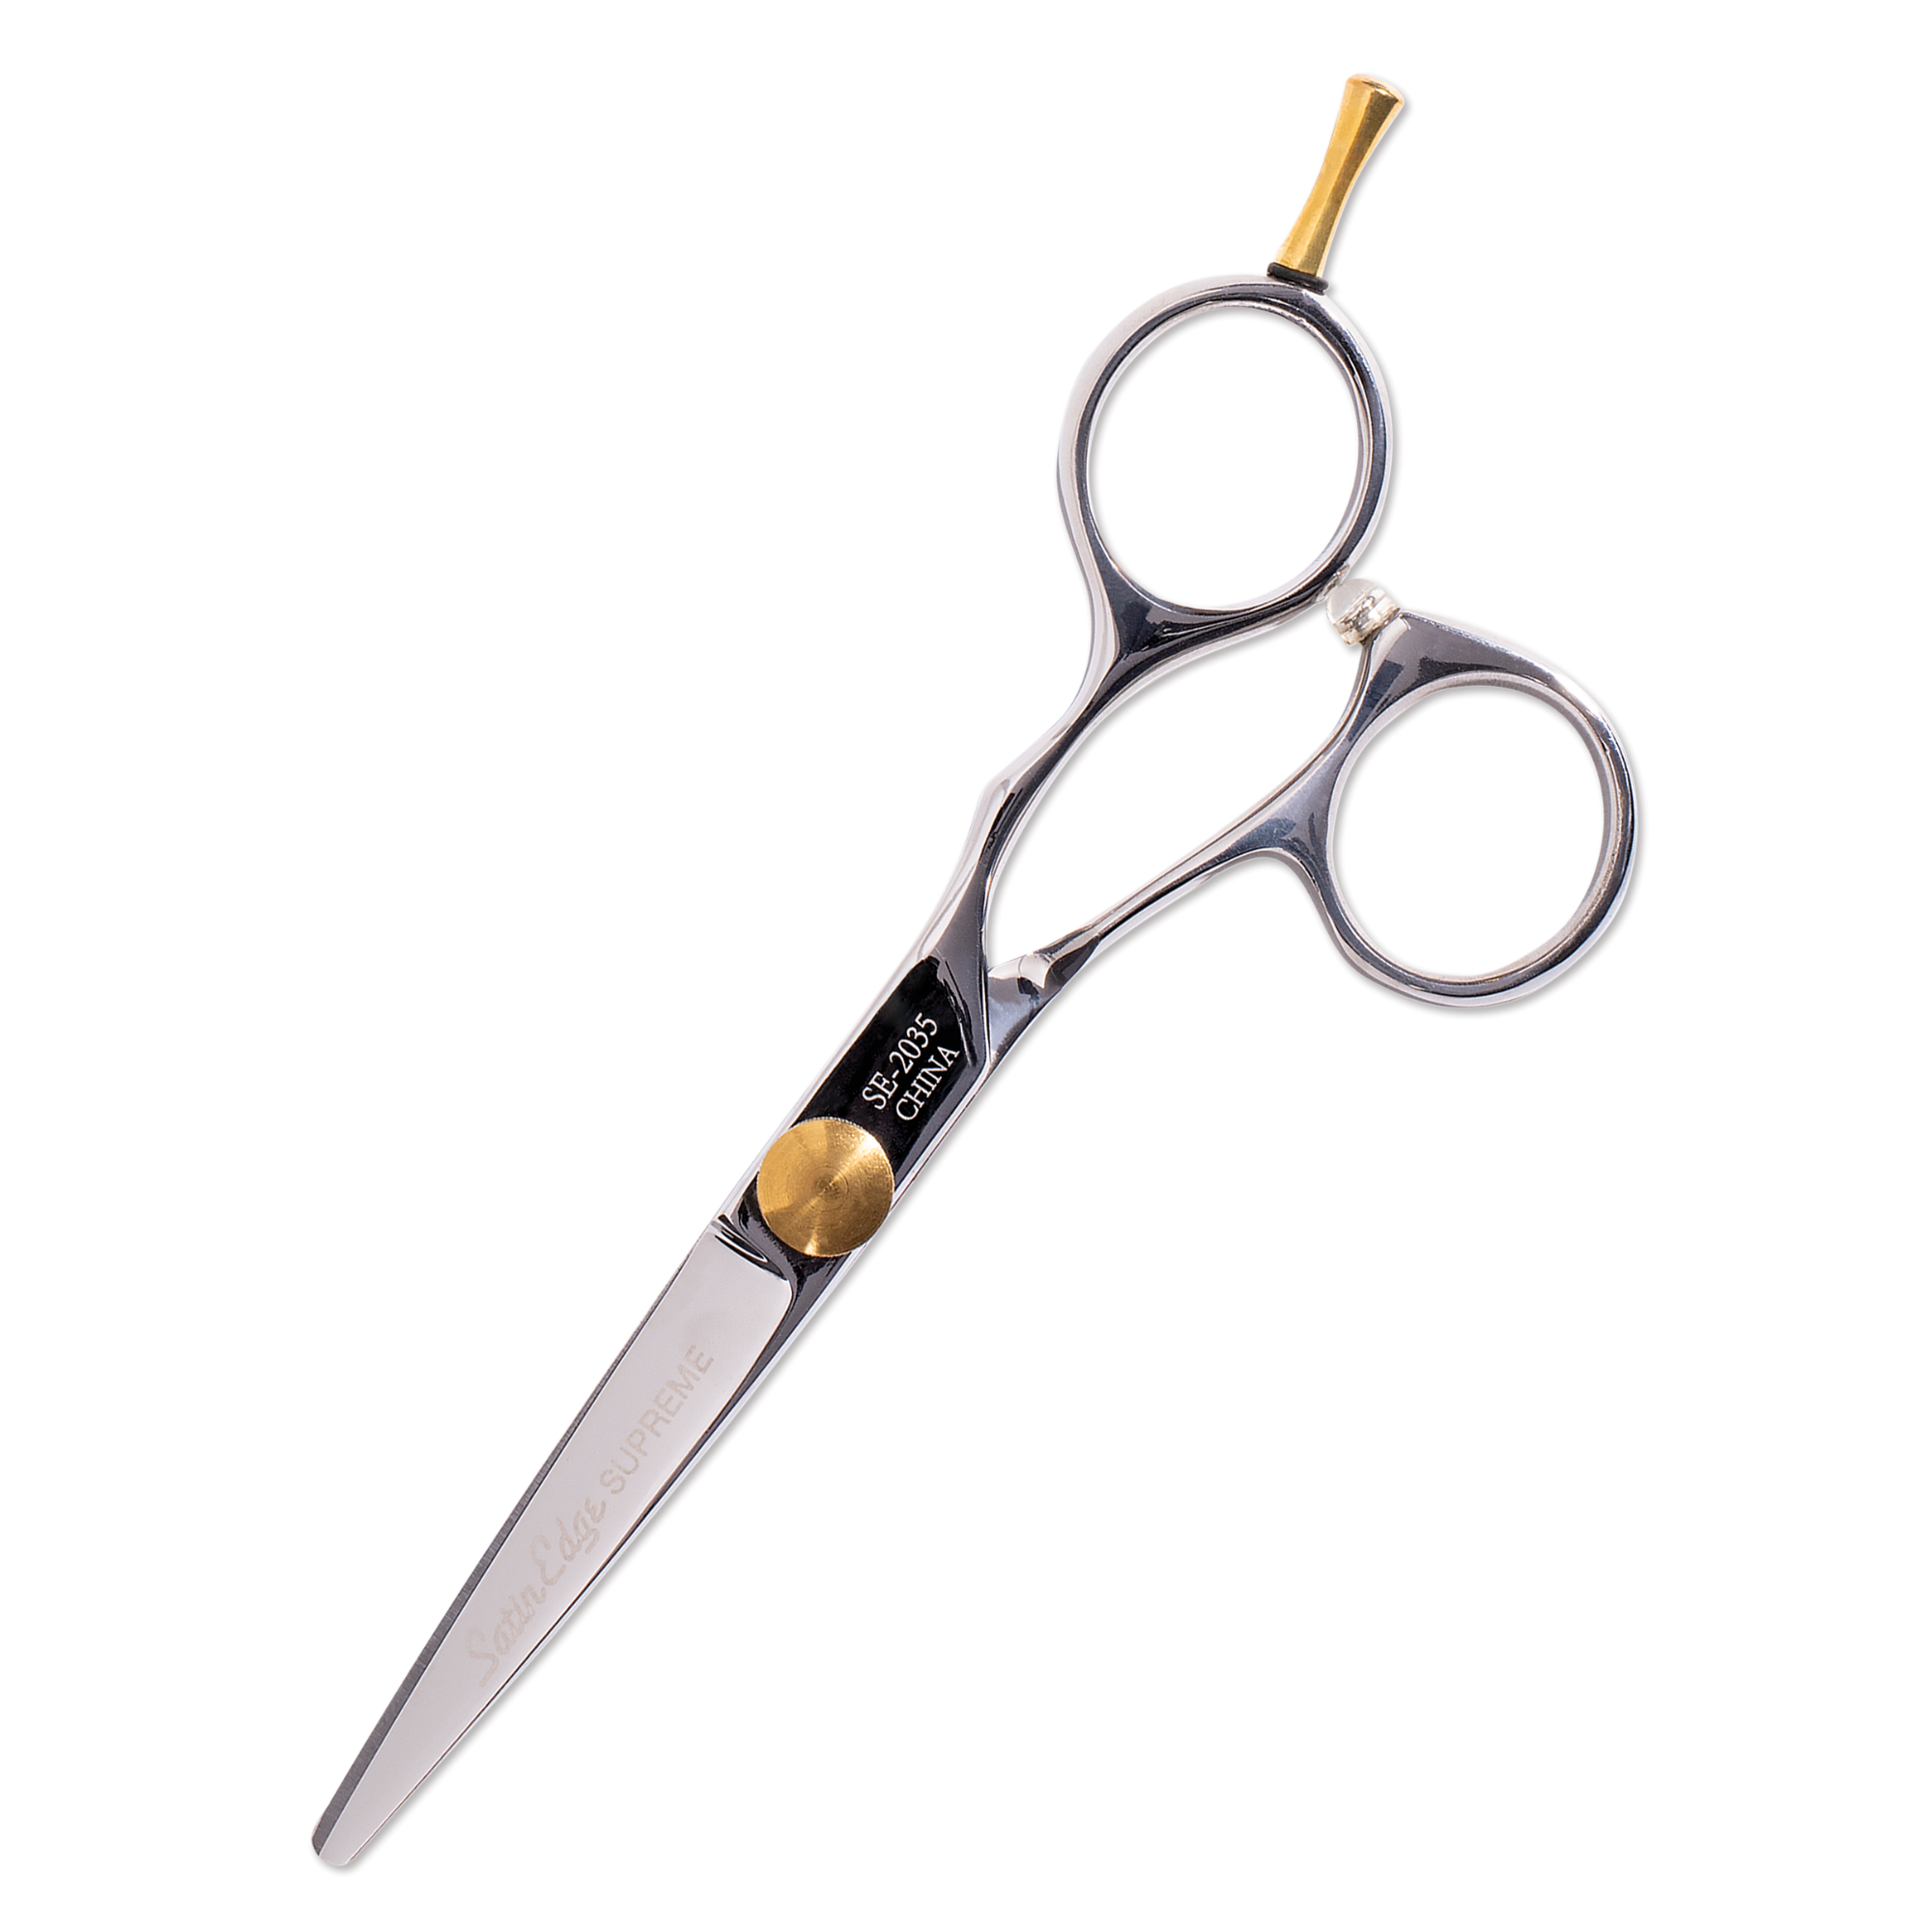 5-1/2" Supreme Stainless Steel Cutting Shear